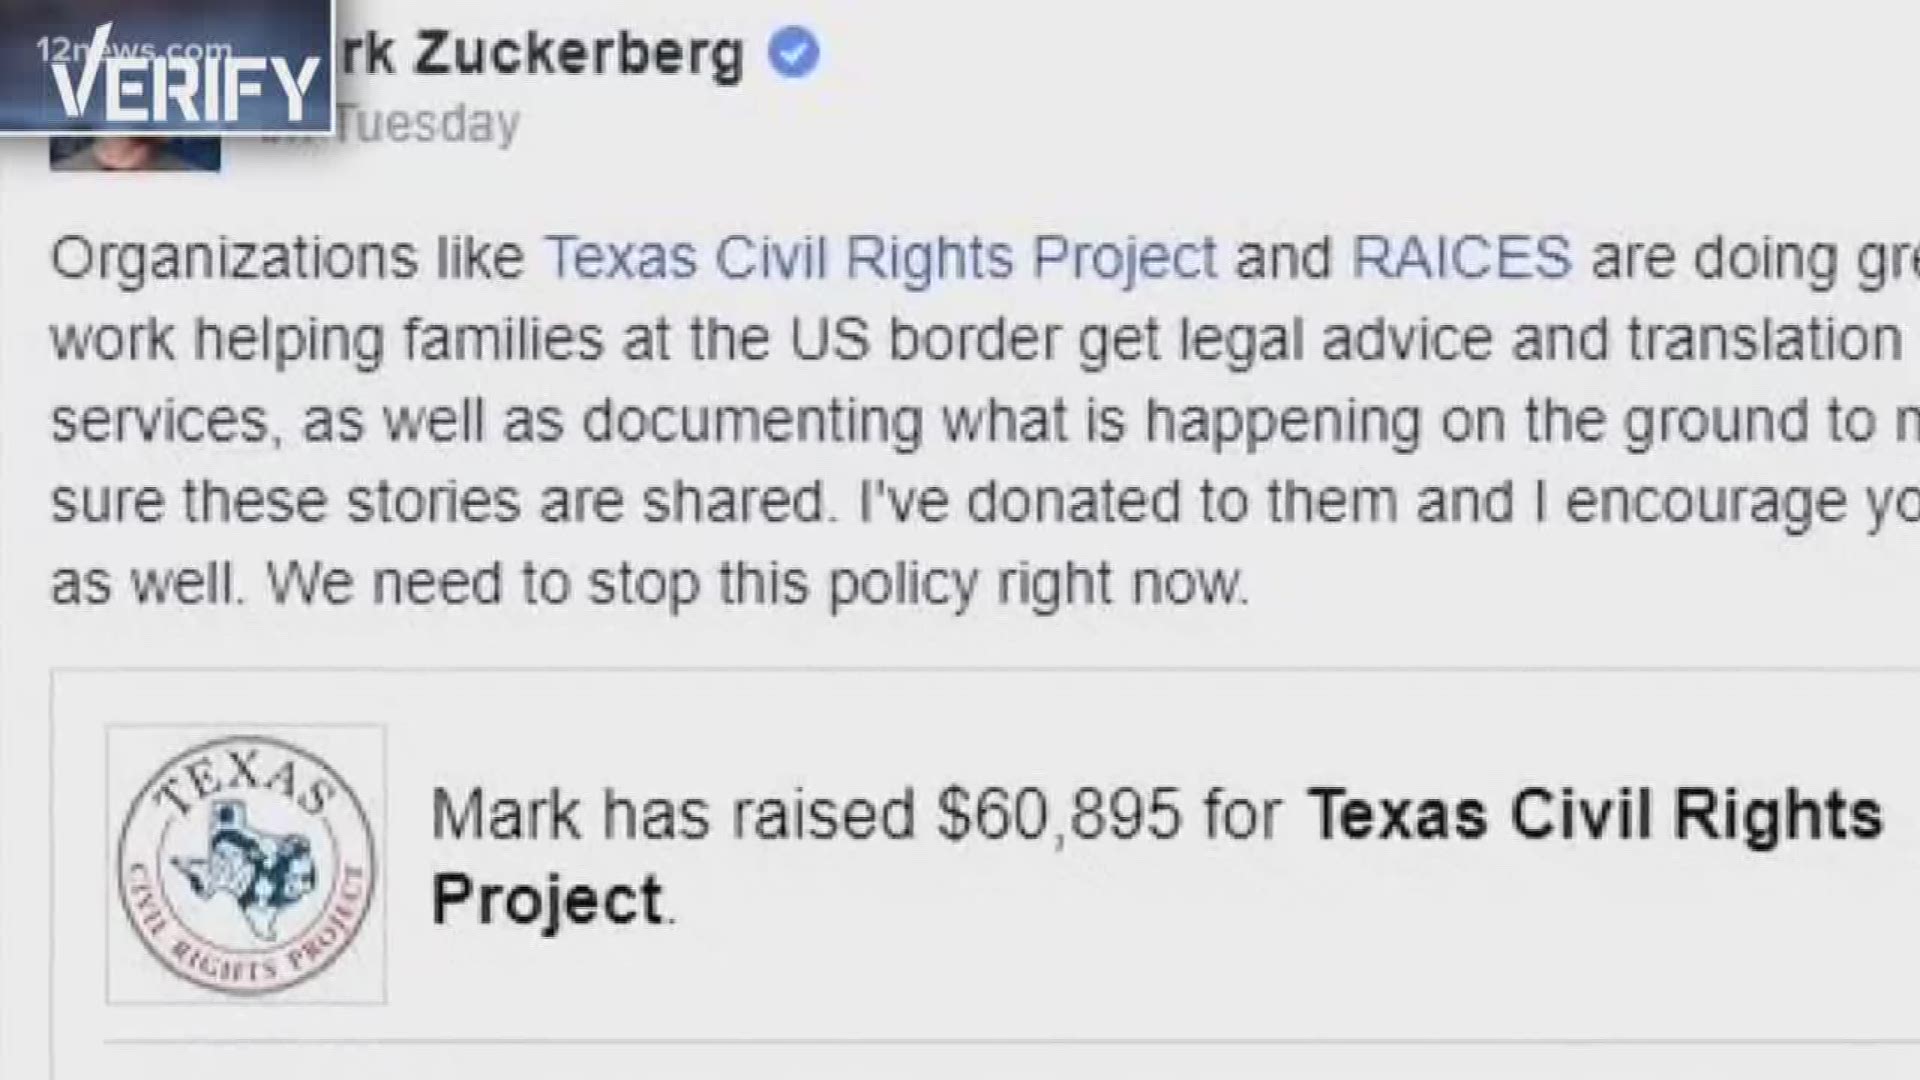 We verified how those donations to immigrant rights groups will be spent.